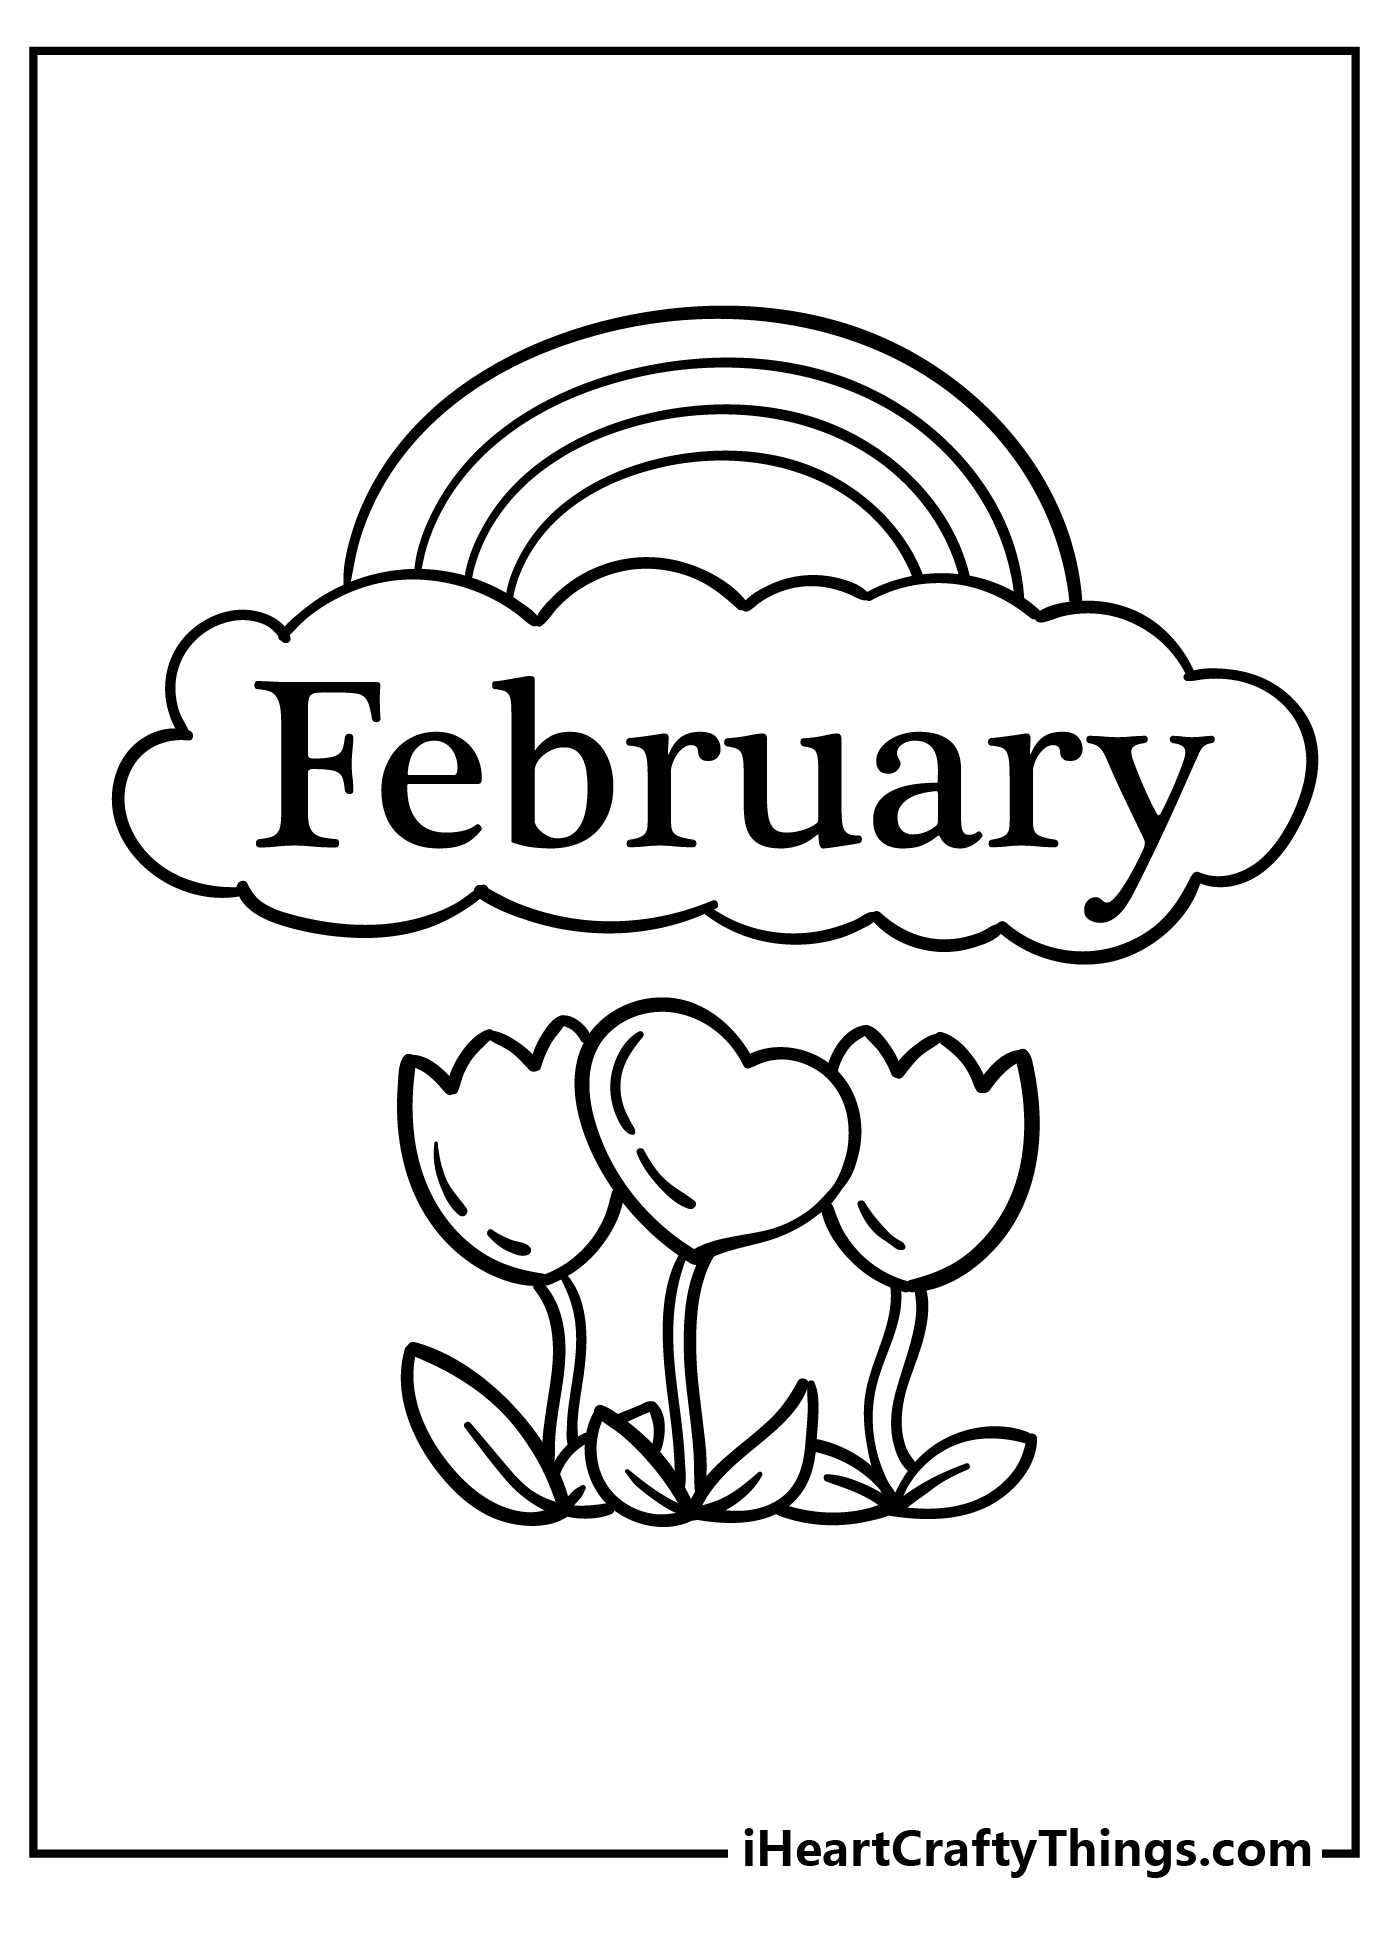 February Coloring Book free printable